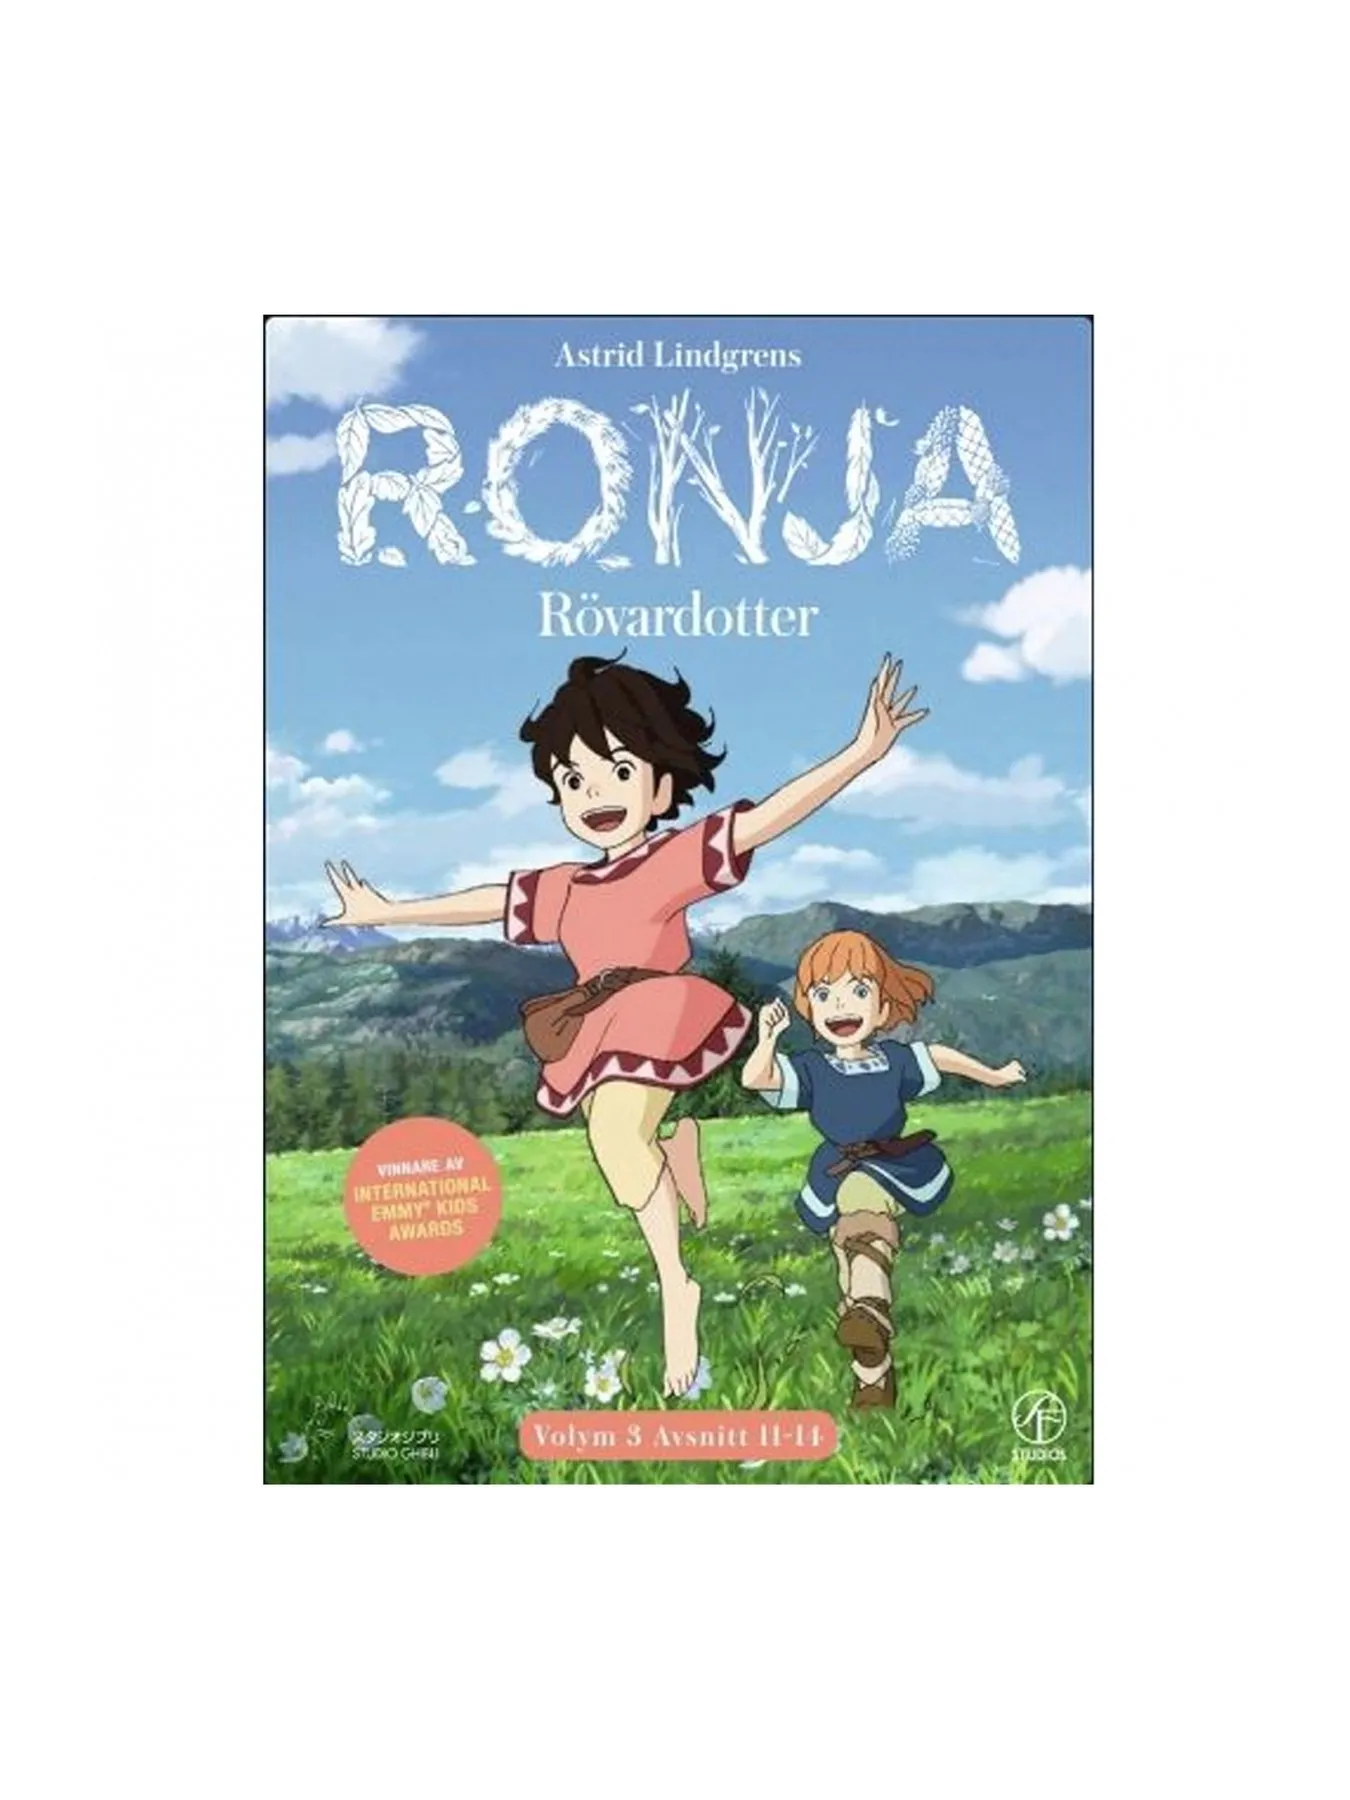 DVD Ronja, the Robber’s Daughter Volume 3/6